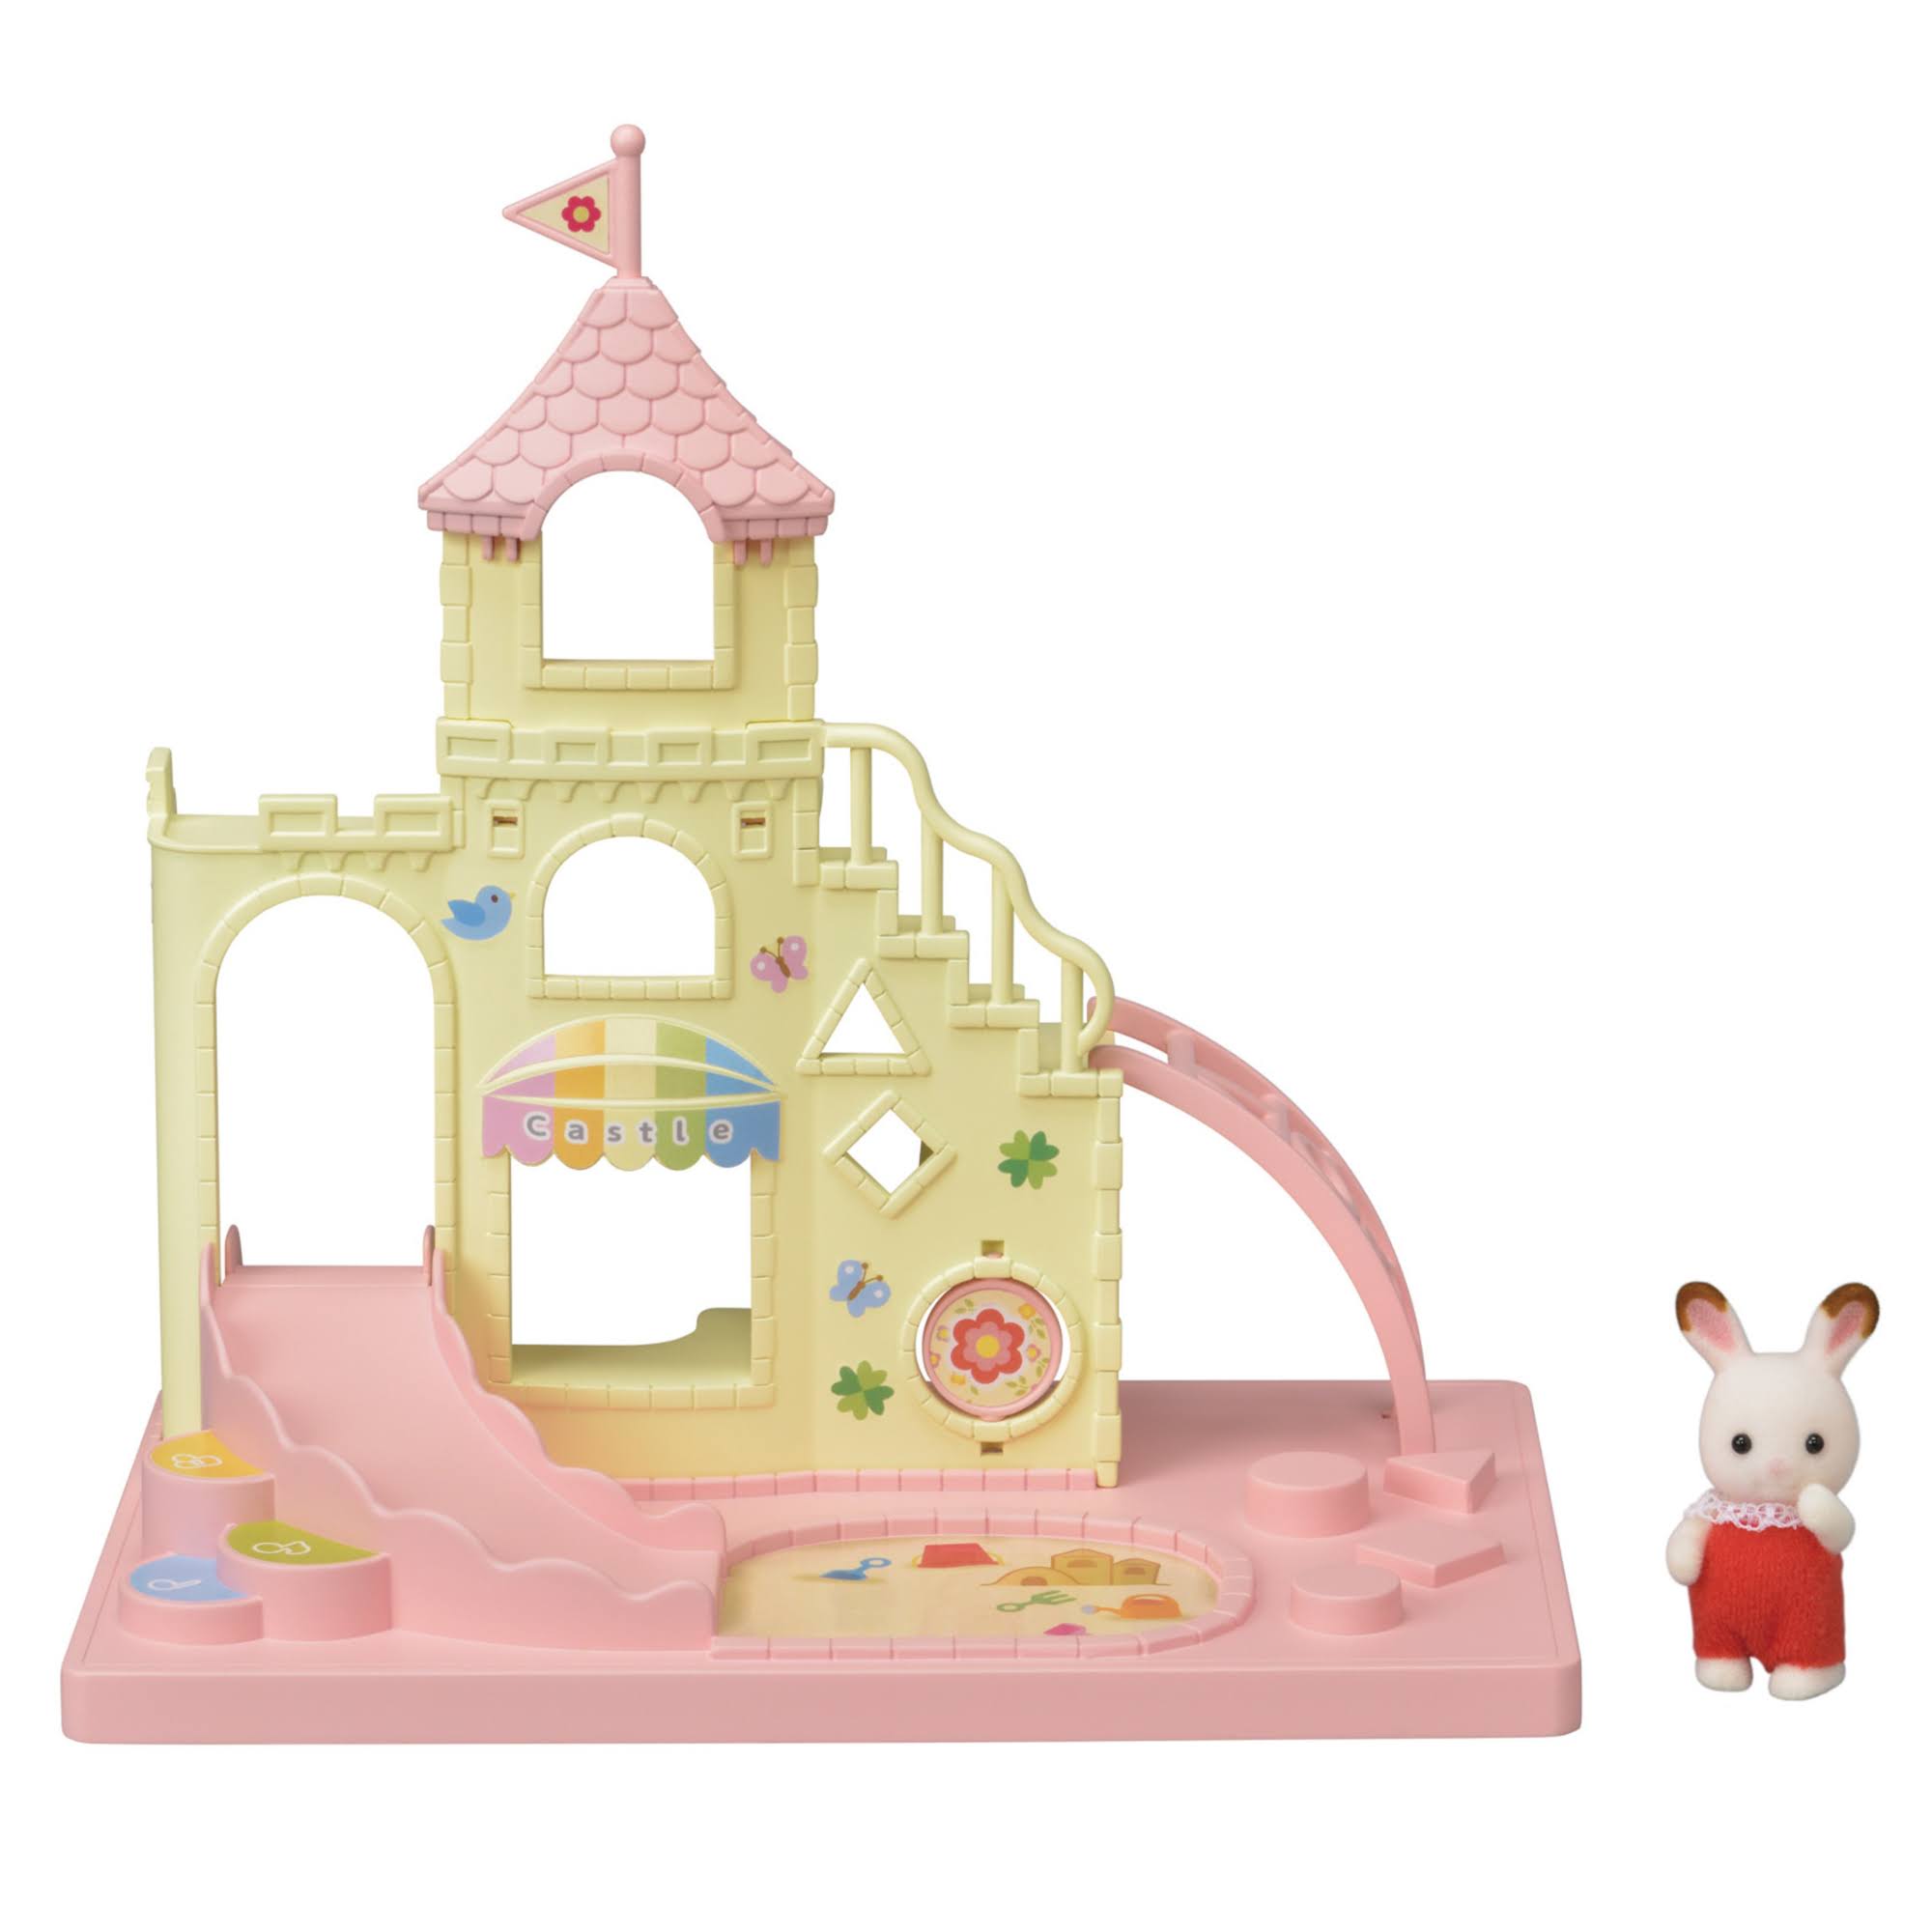 Calico Critters Baby Castle Playground Doll House Playset